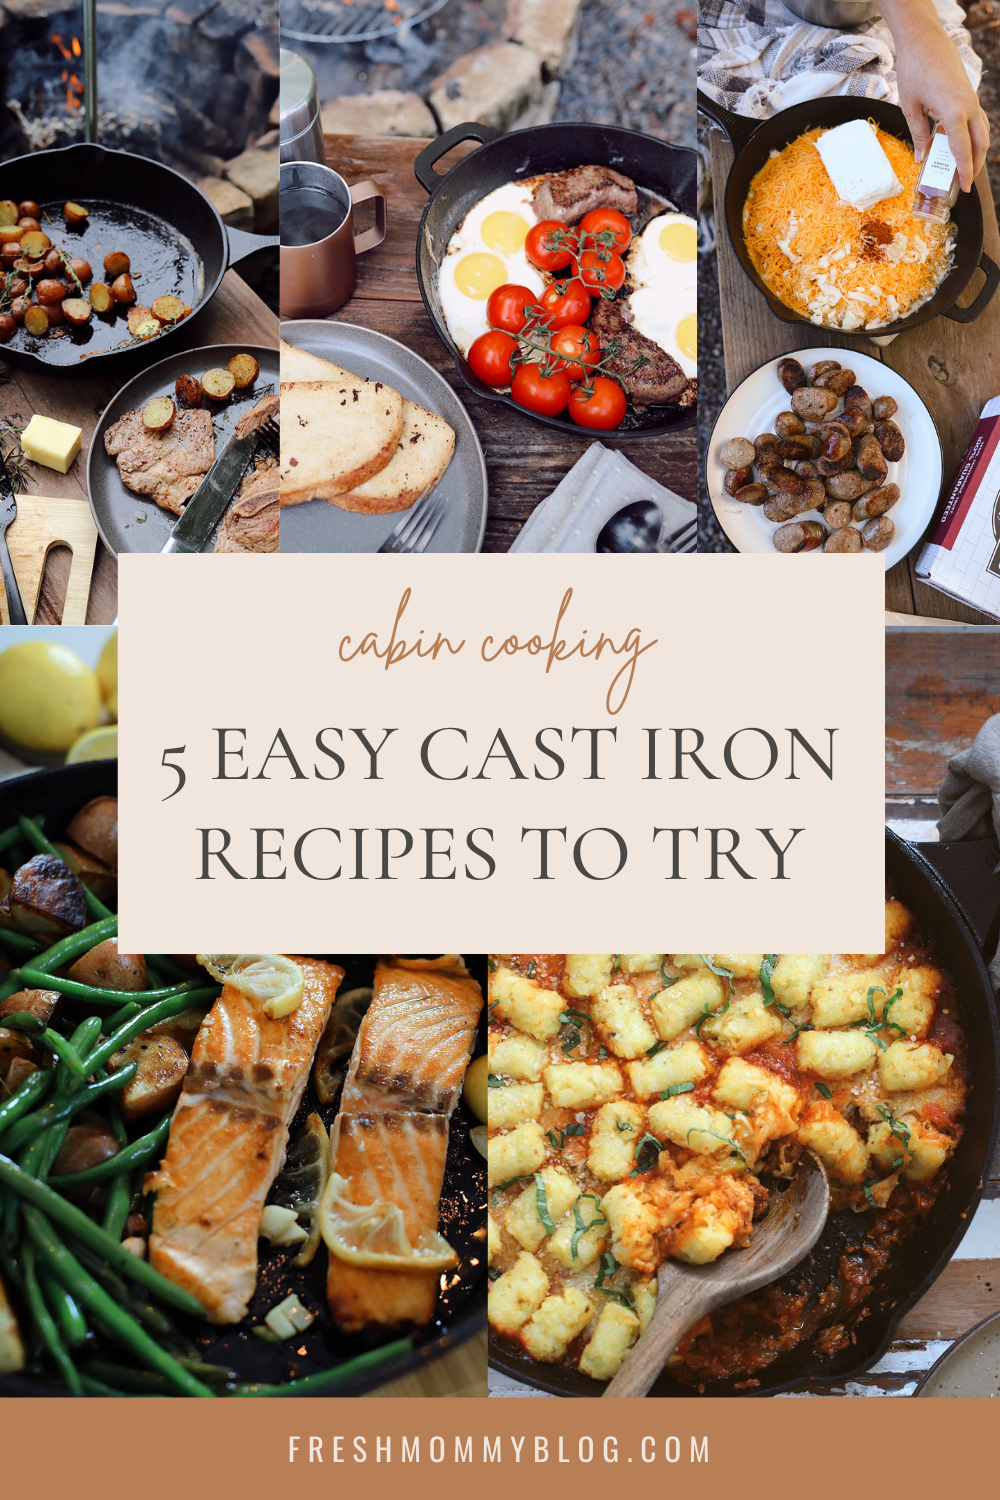 Cabin cooking with 5 delicious cast iron recipes to try on your next cabin trip! Feature by US lifestyle blogger Tabitha Blue of Fresh Mommy Blog.